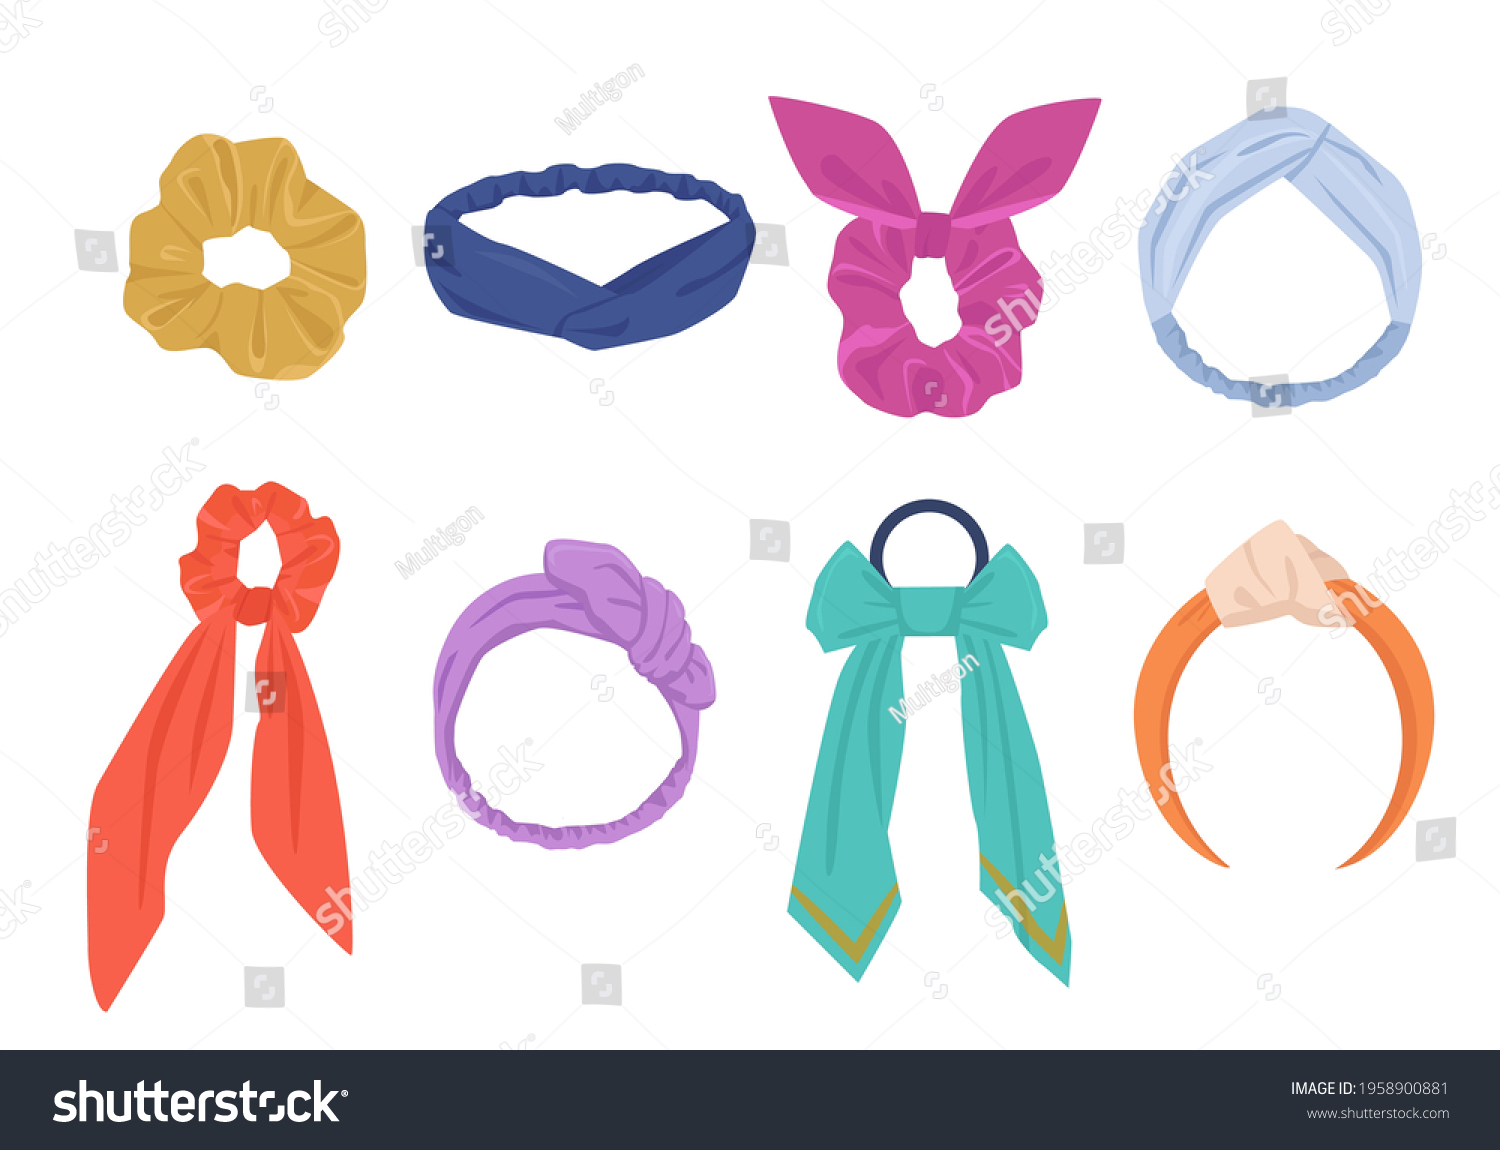 SVG of Elegant hair ties and hoops set. Fashionable womens yellow accessory with hanging blue ribbons stylish purple headband and vintage orange bandana with elastic inserts. Vector fashion. svg